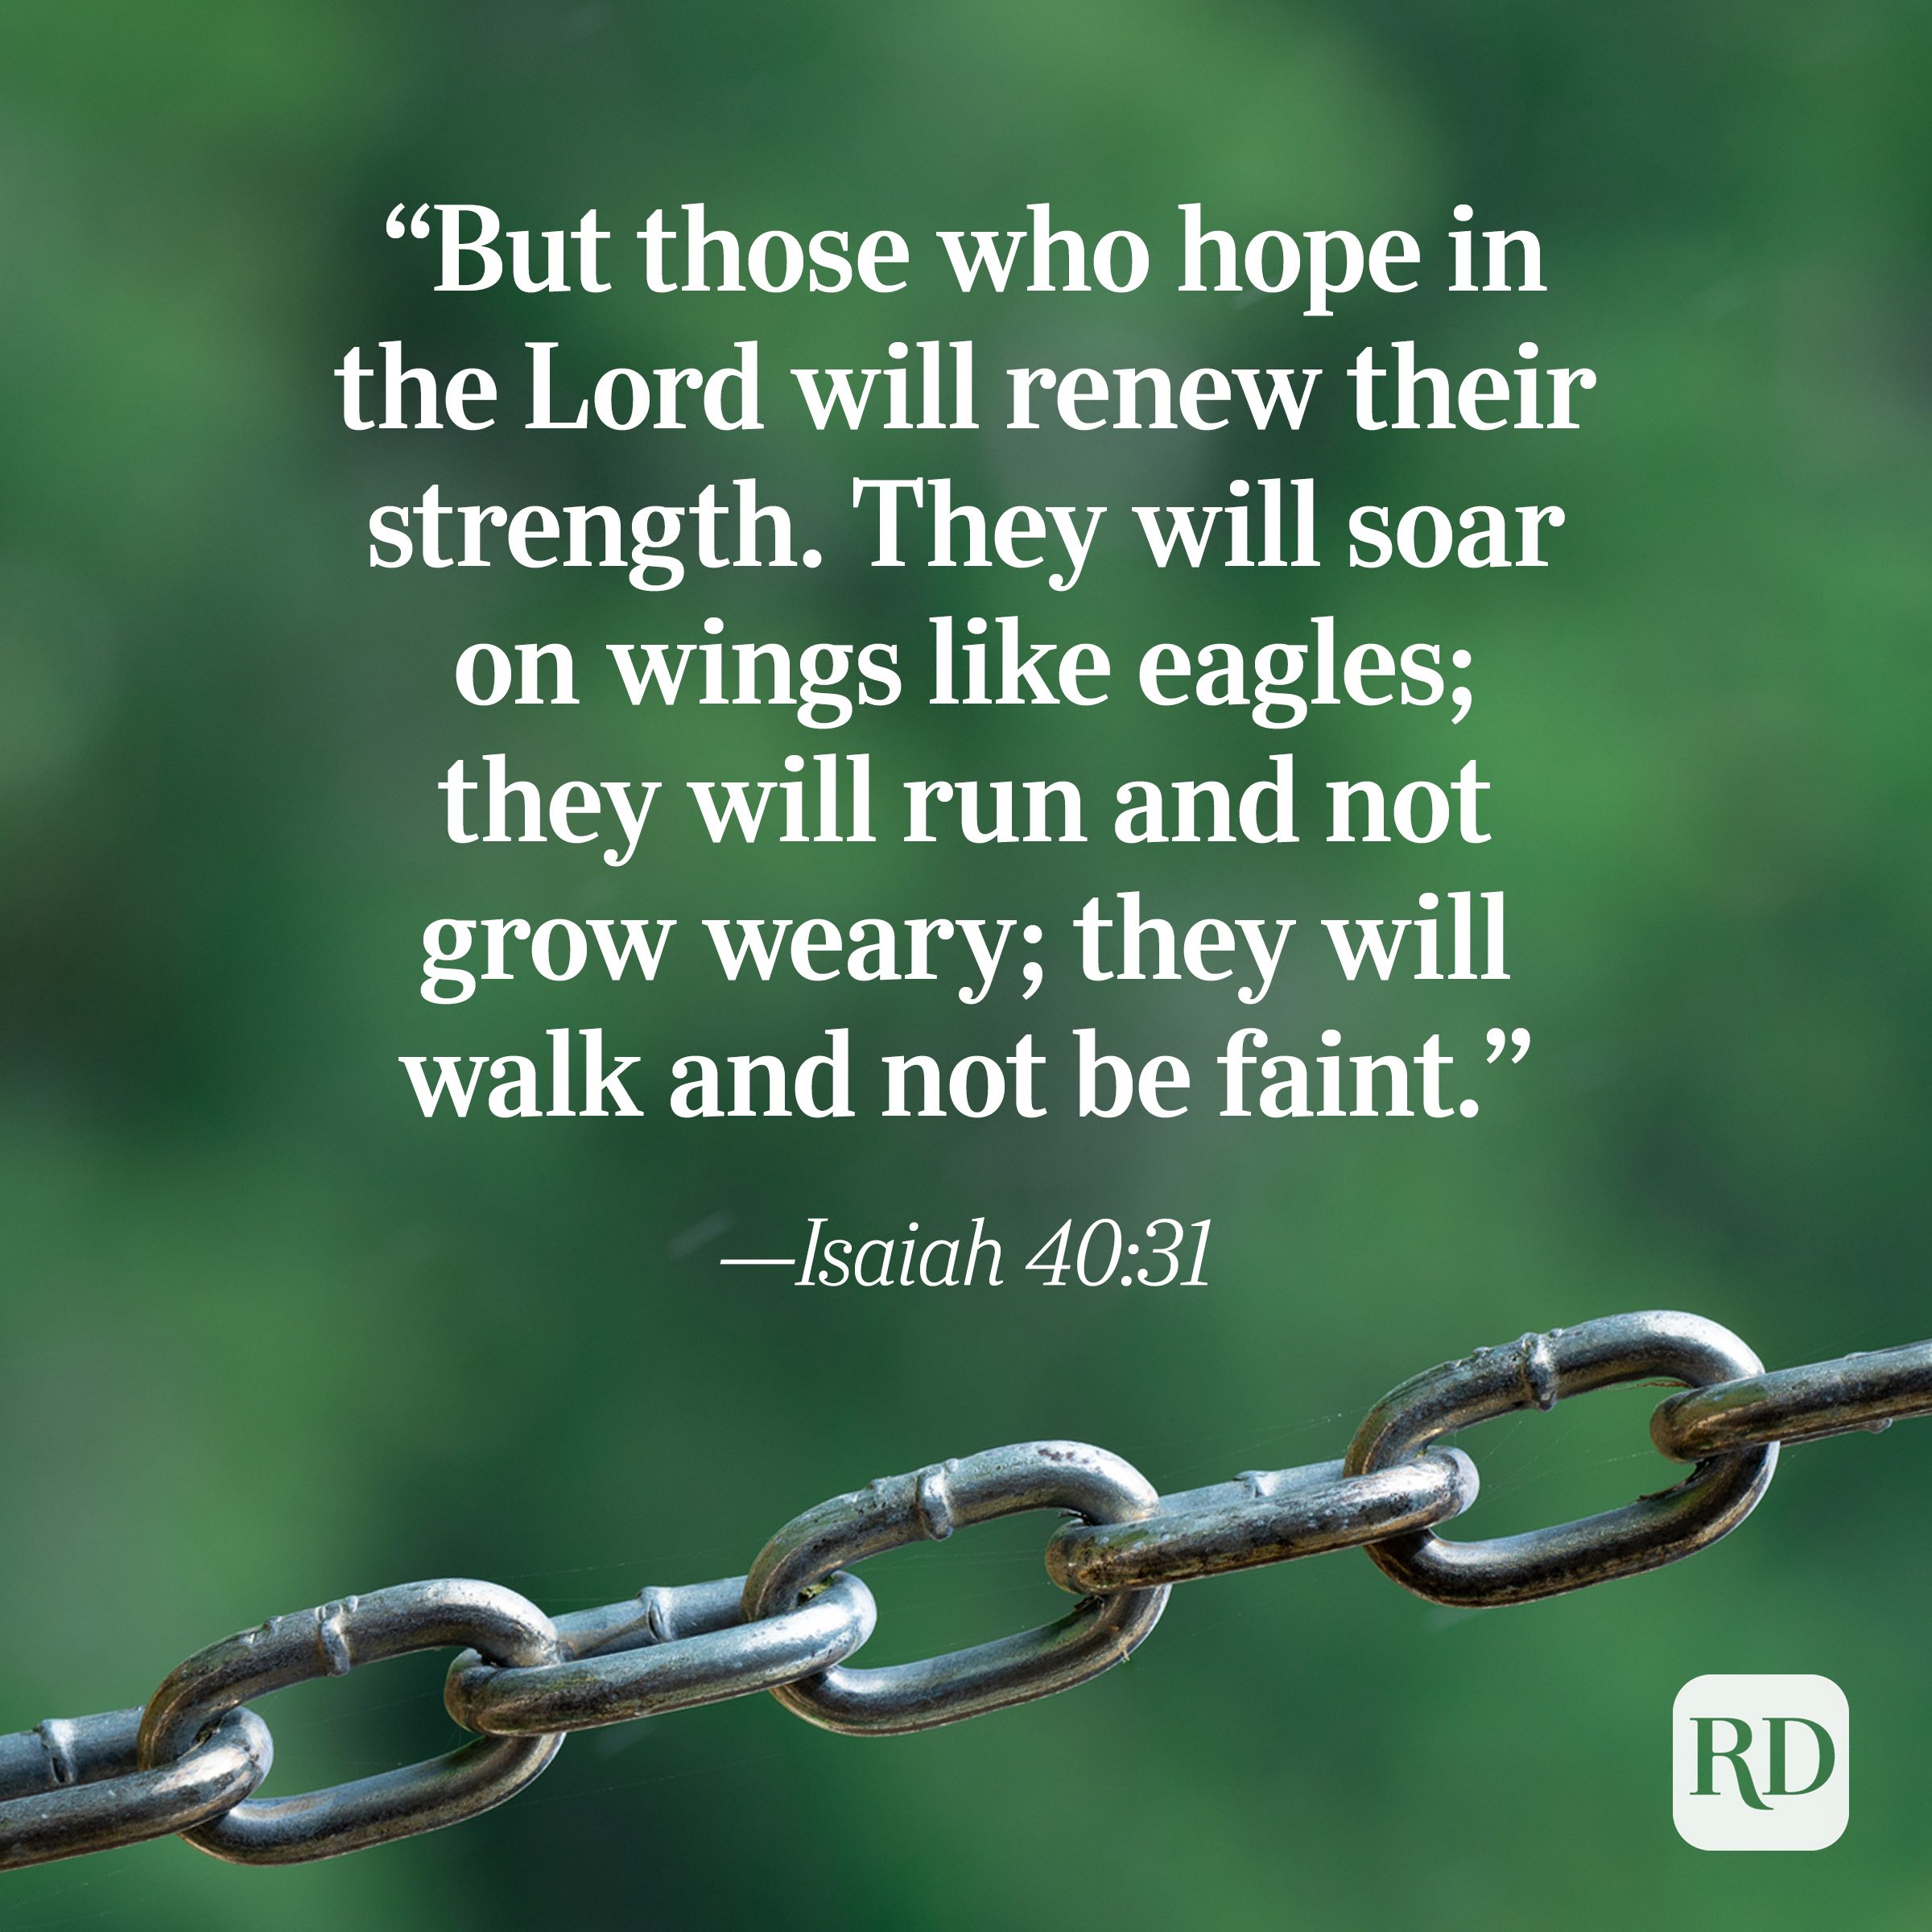 Bible Quote: Isaiah 40:31